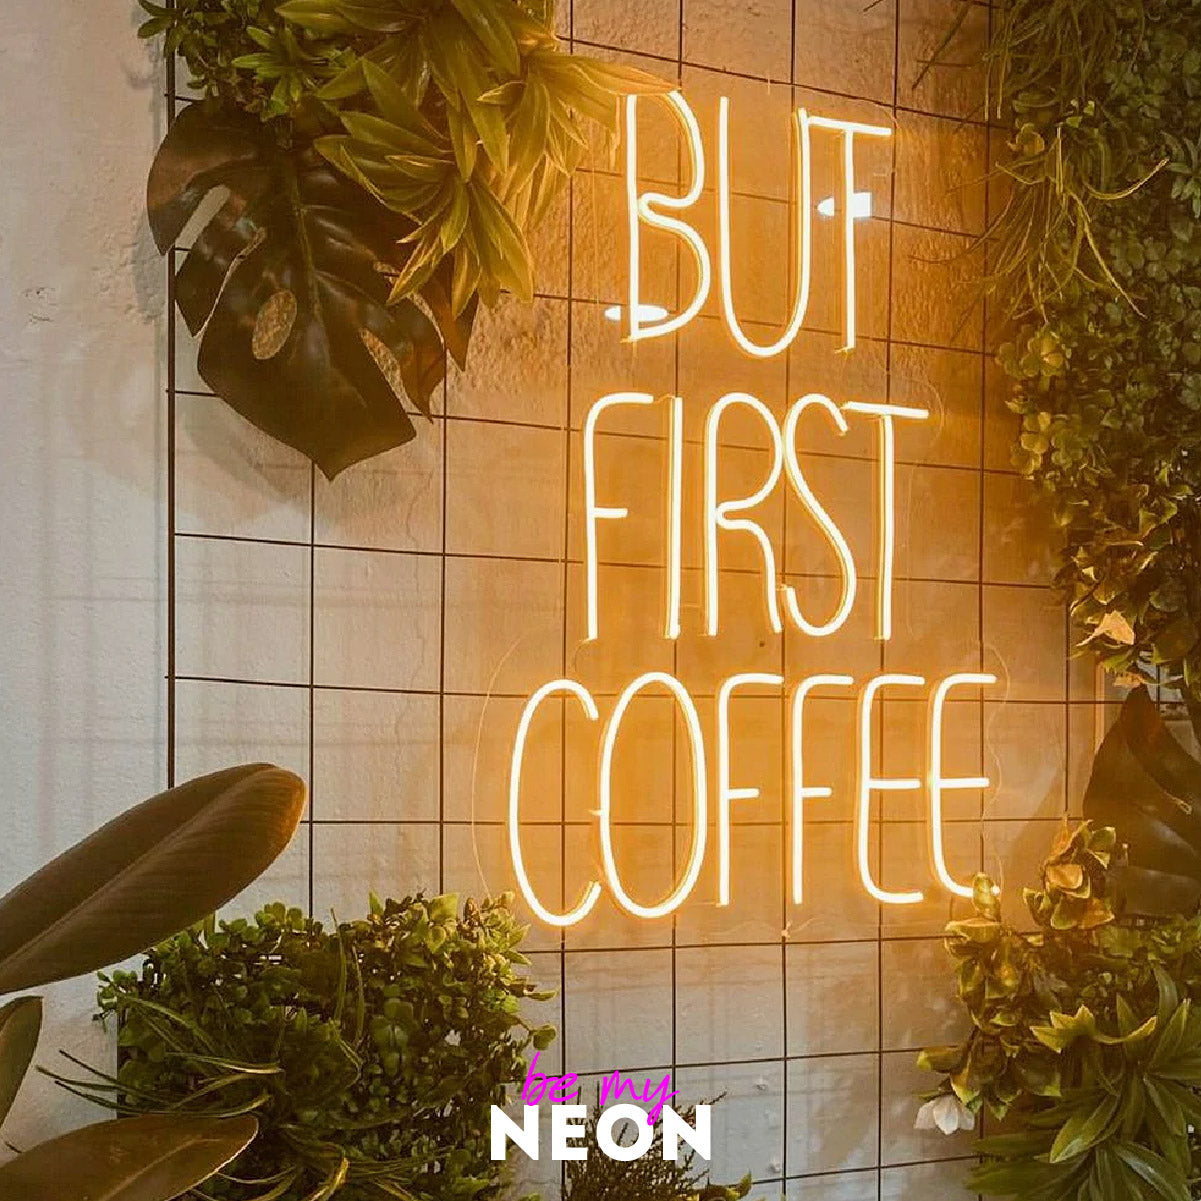 "But First Coffee" LED Neonschild